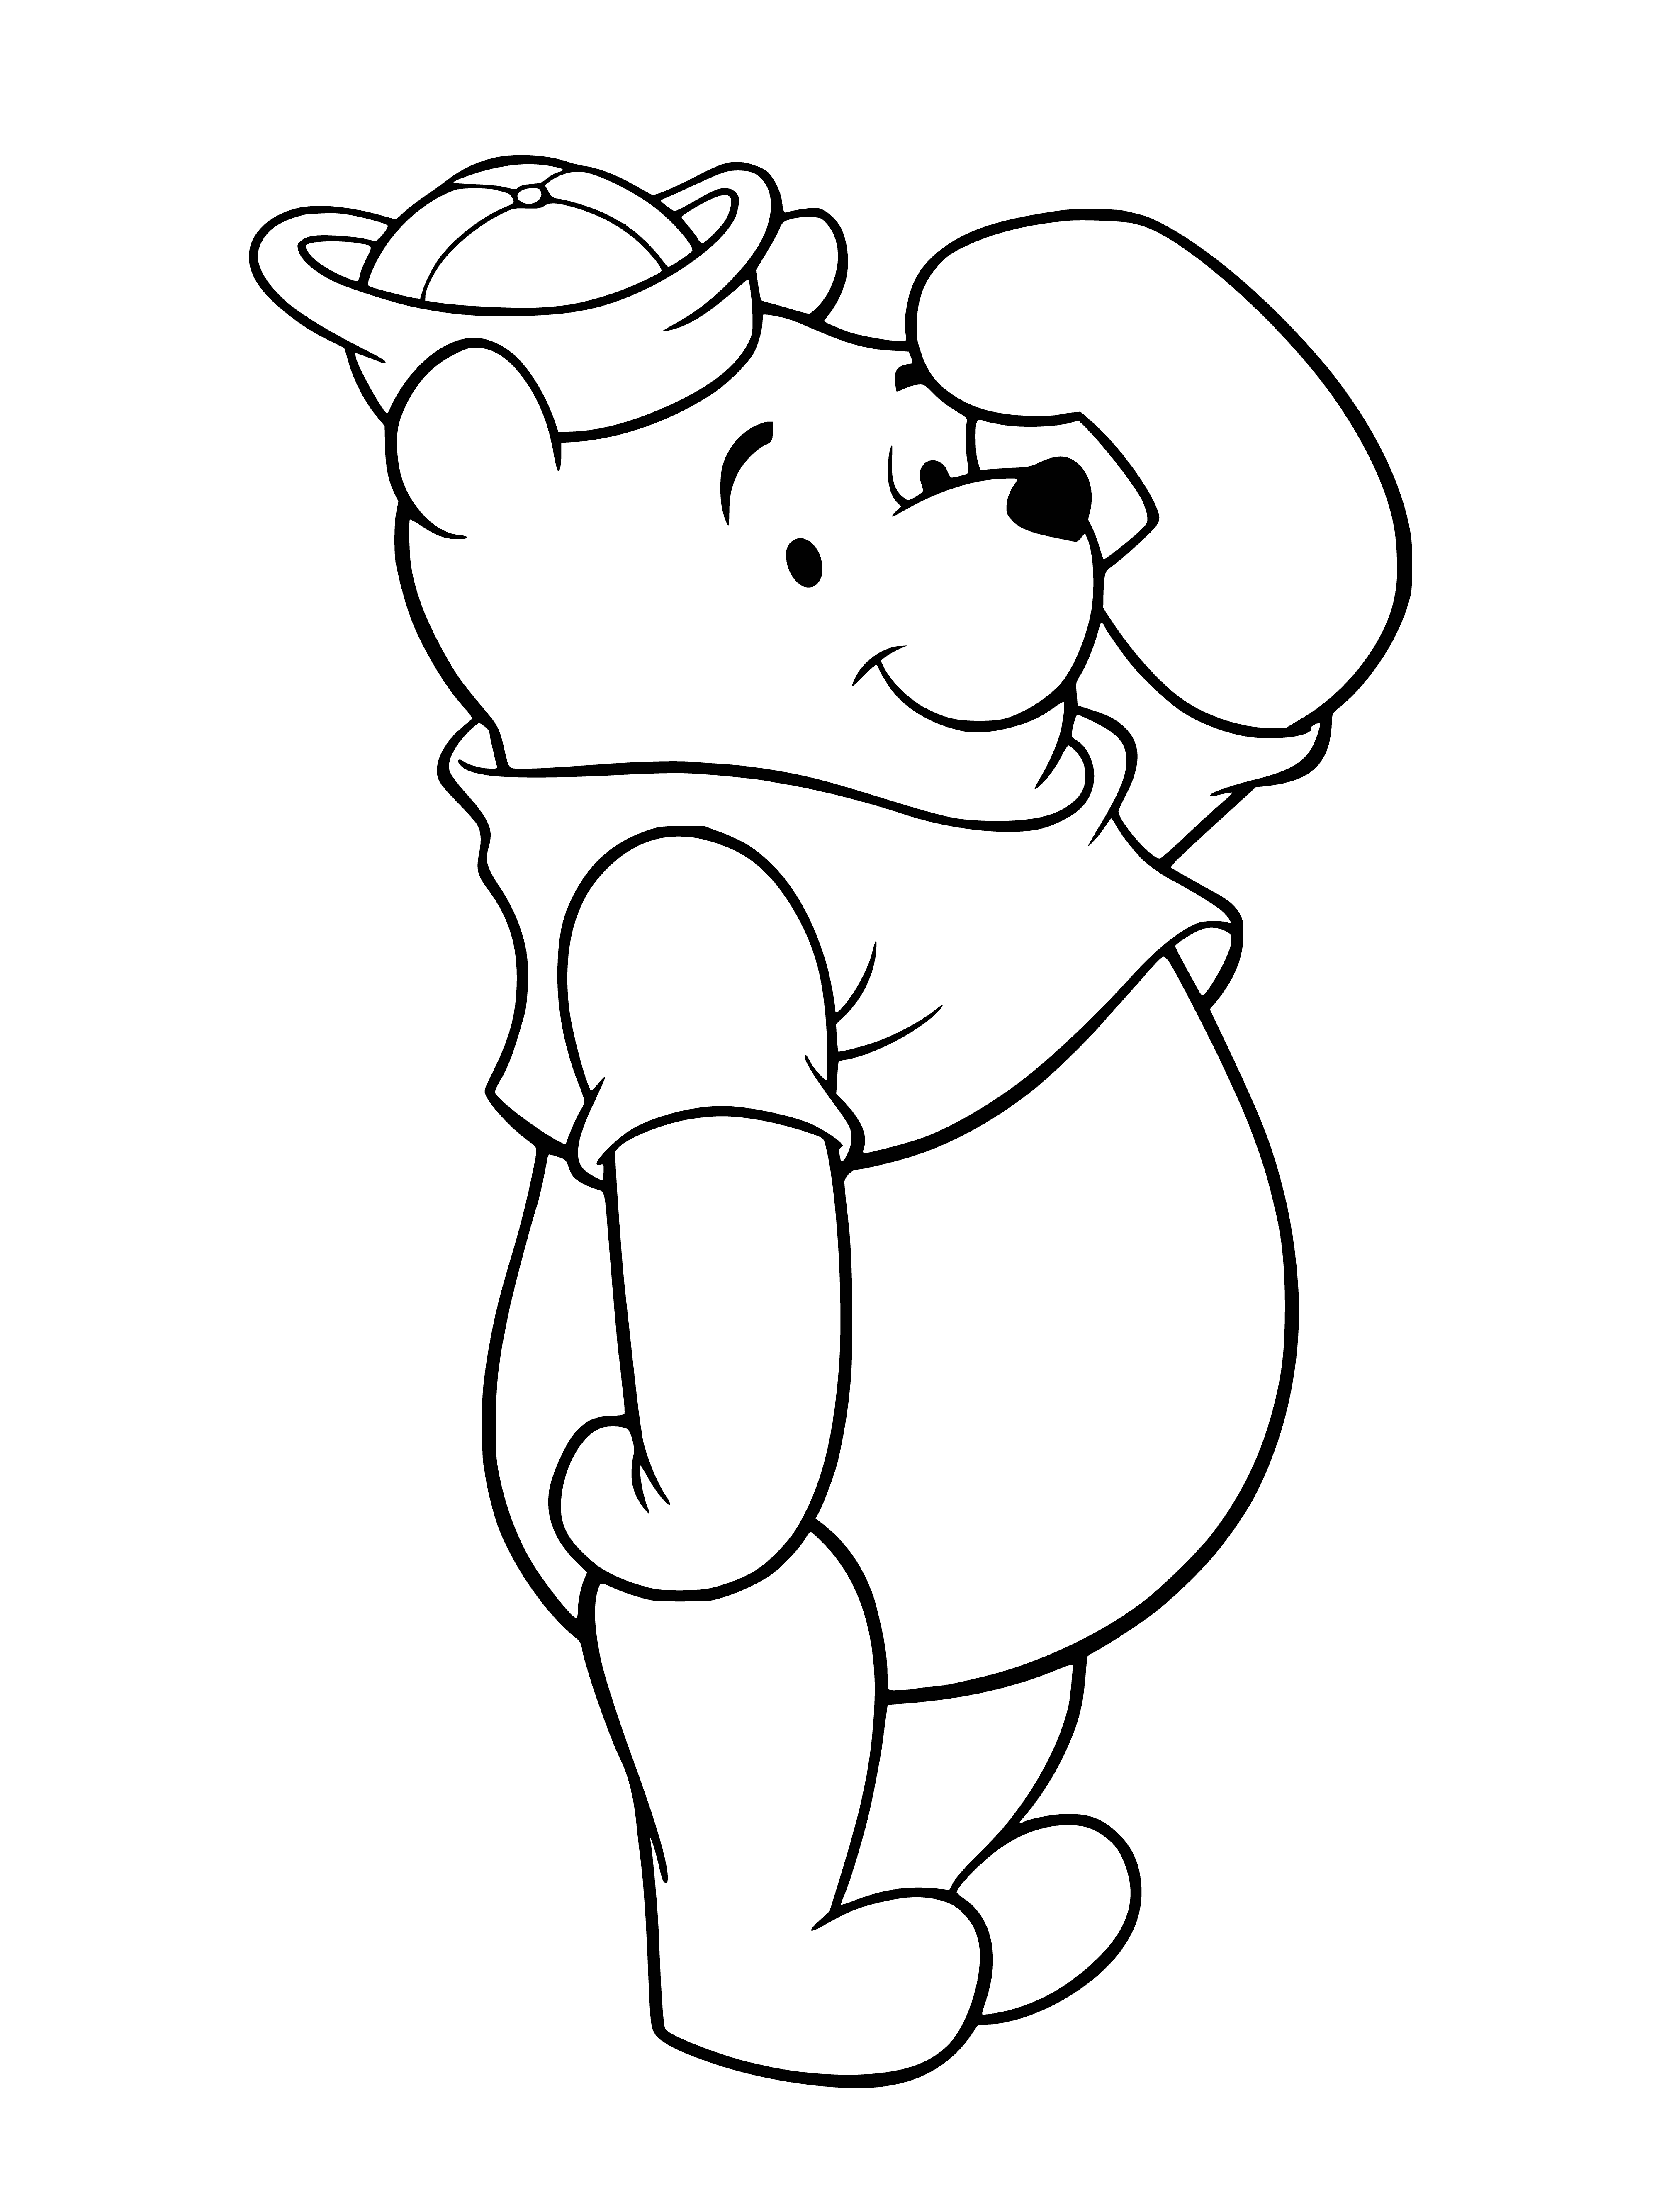 coloring page: Winnie the Pooh sails in blue & white shirt, red scarf, sailor's hat. Island with trees & blue sky in background.